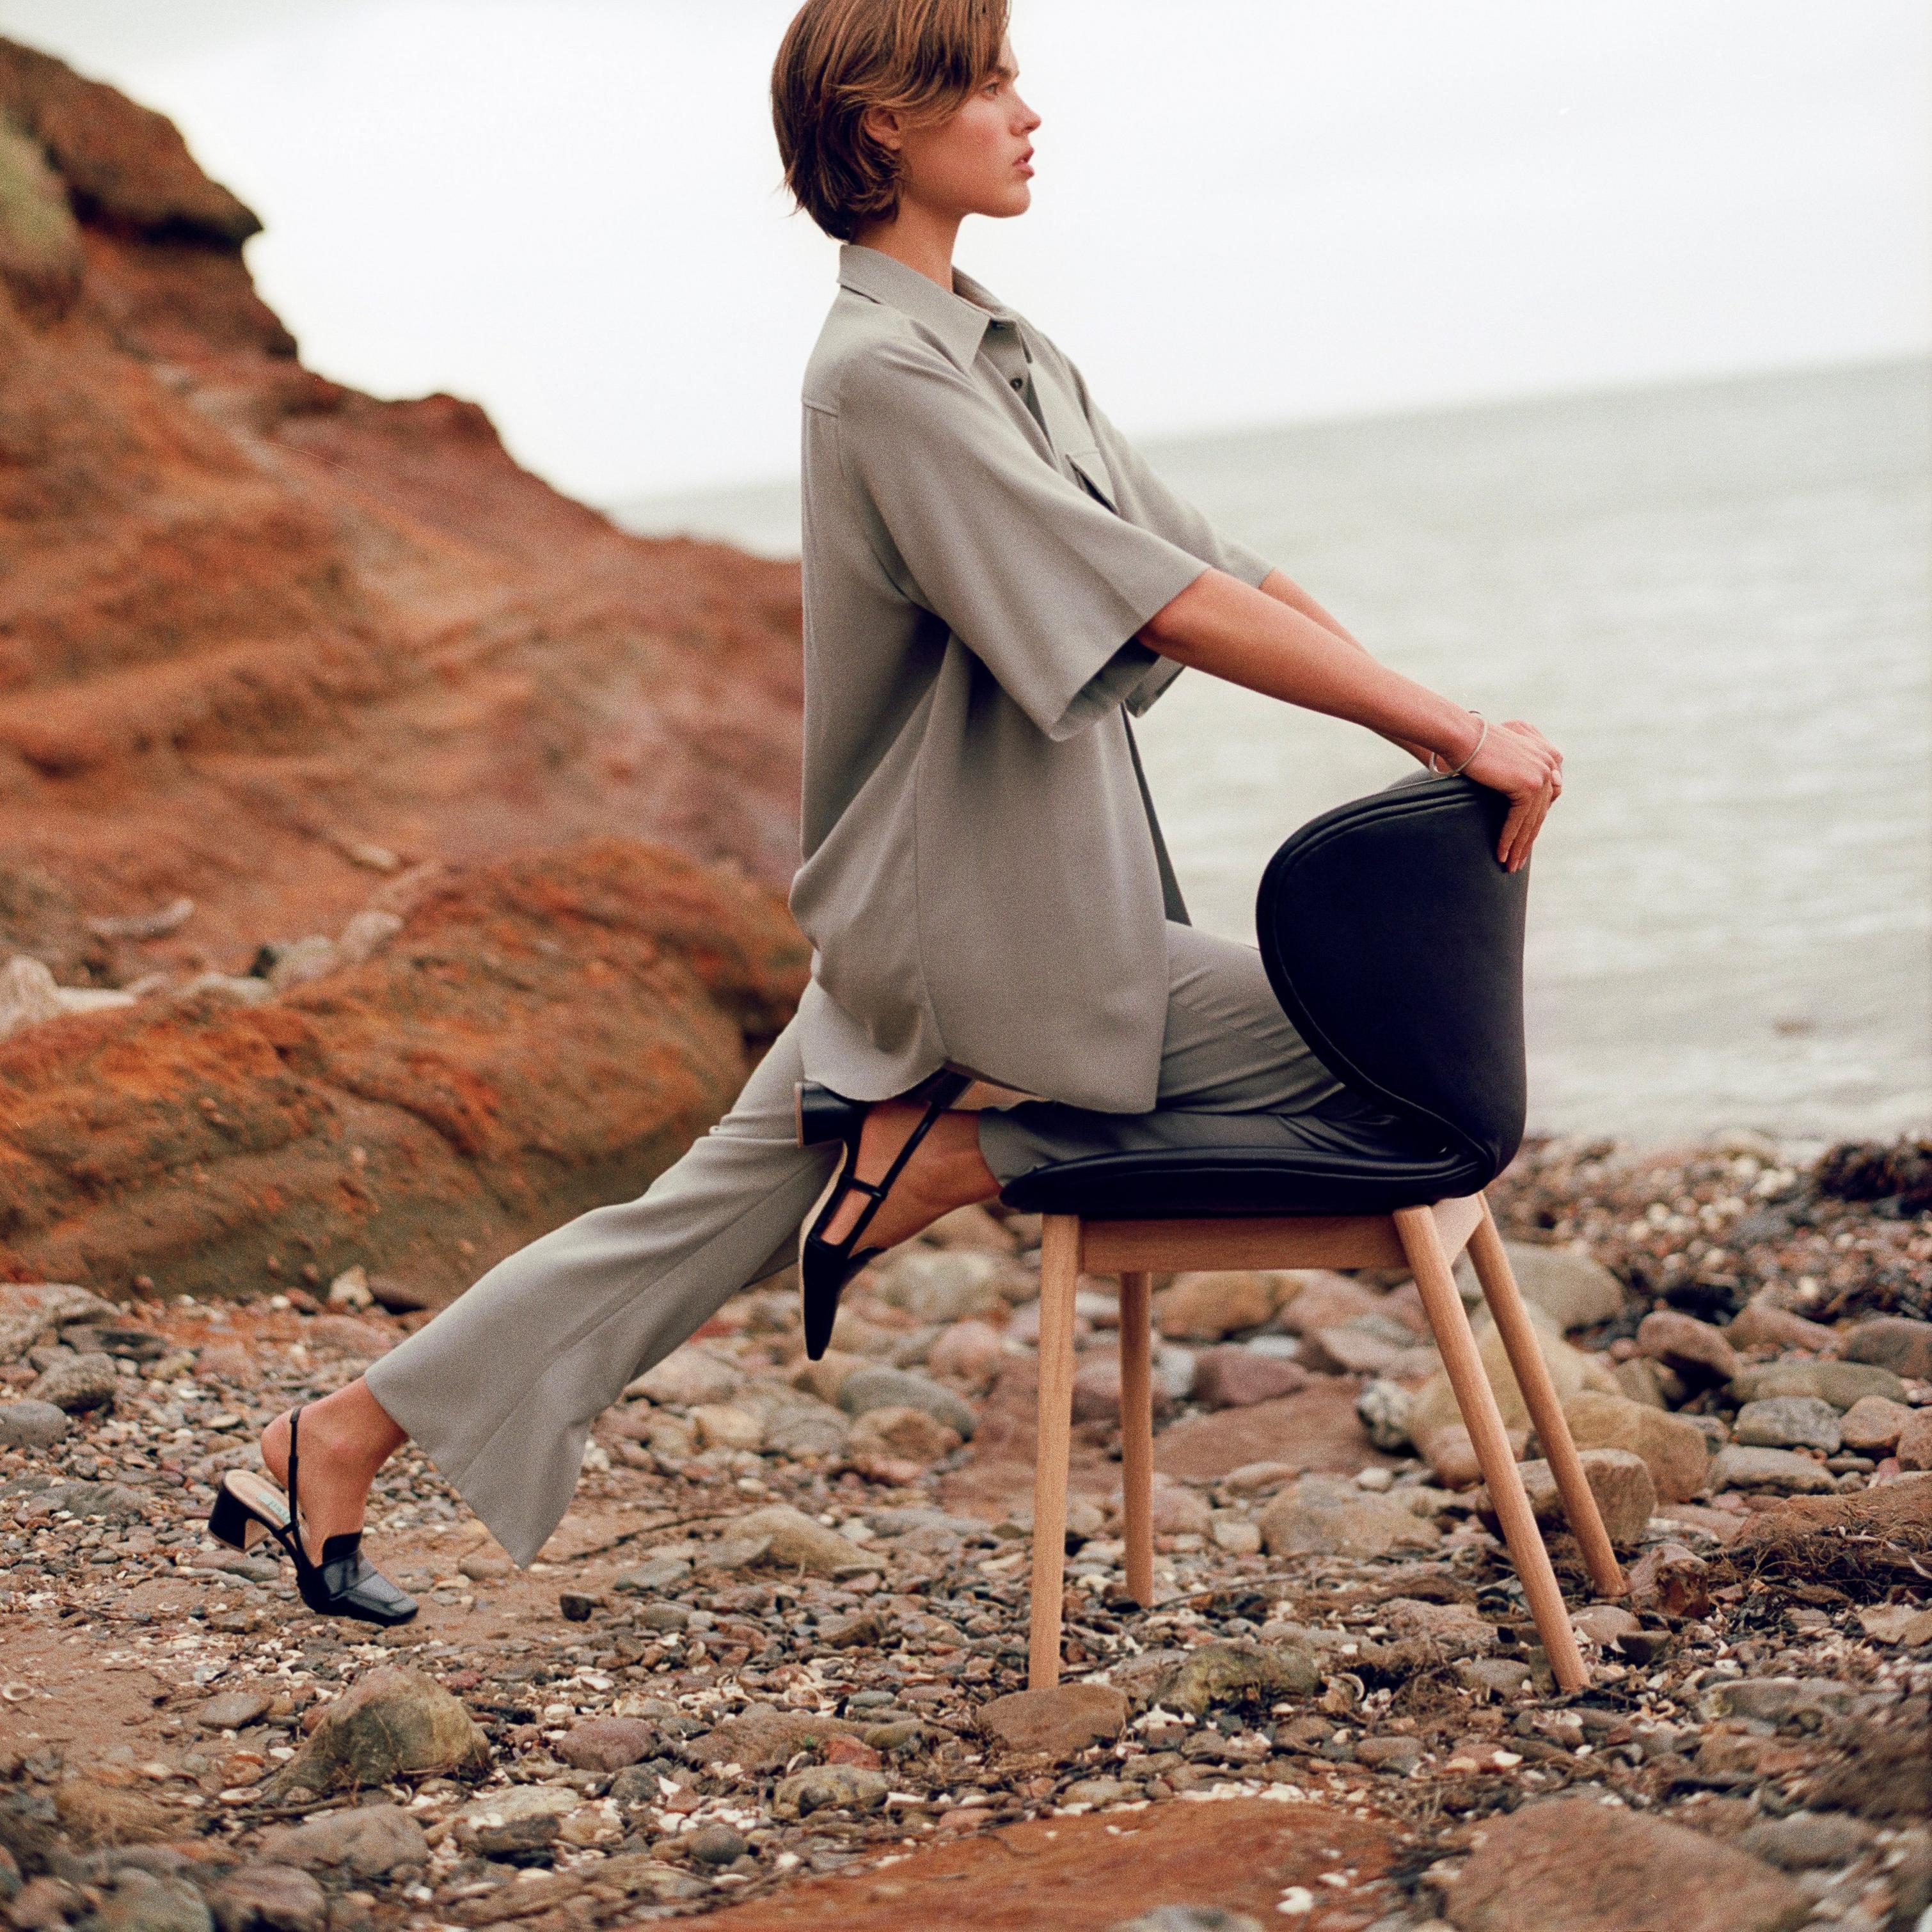 Woman in a grey outfit seated backwards on a Hamilton chair by a rocky shore, looking out to sea.